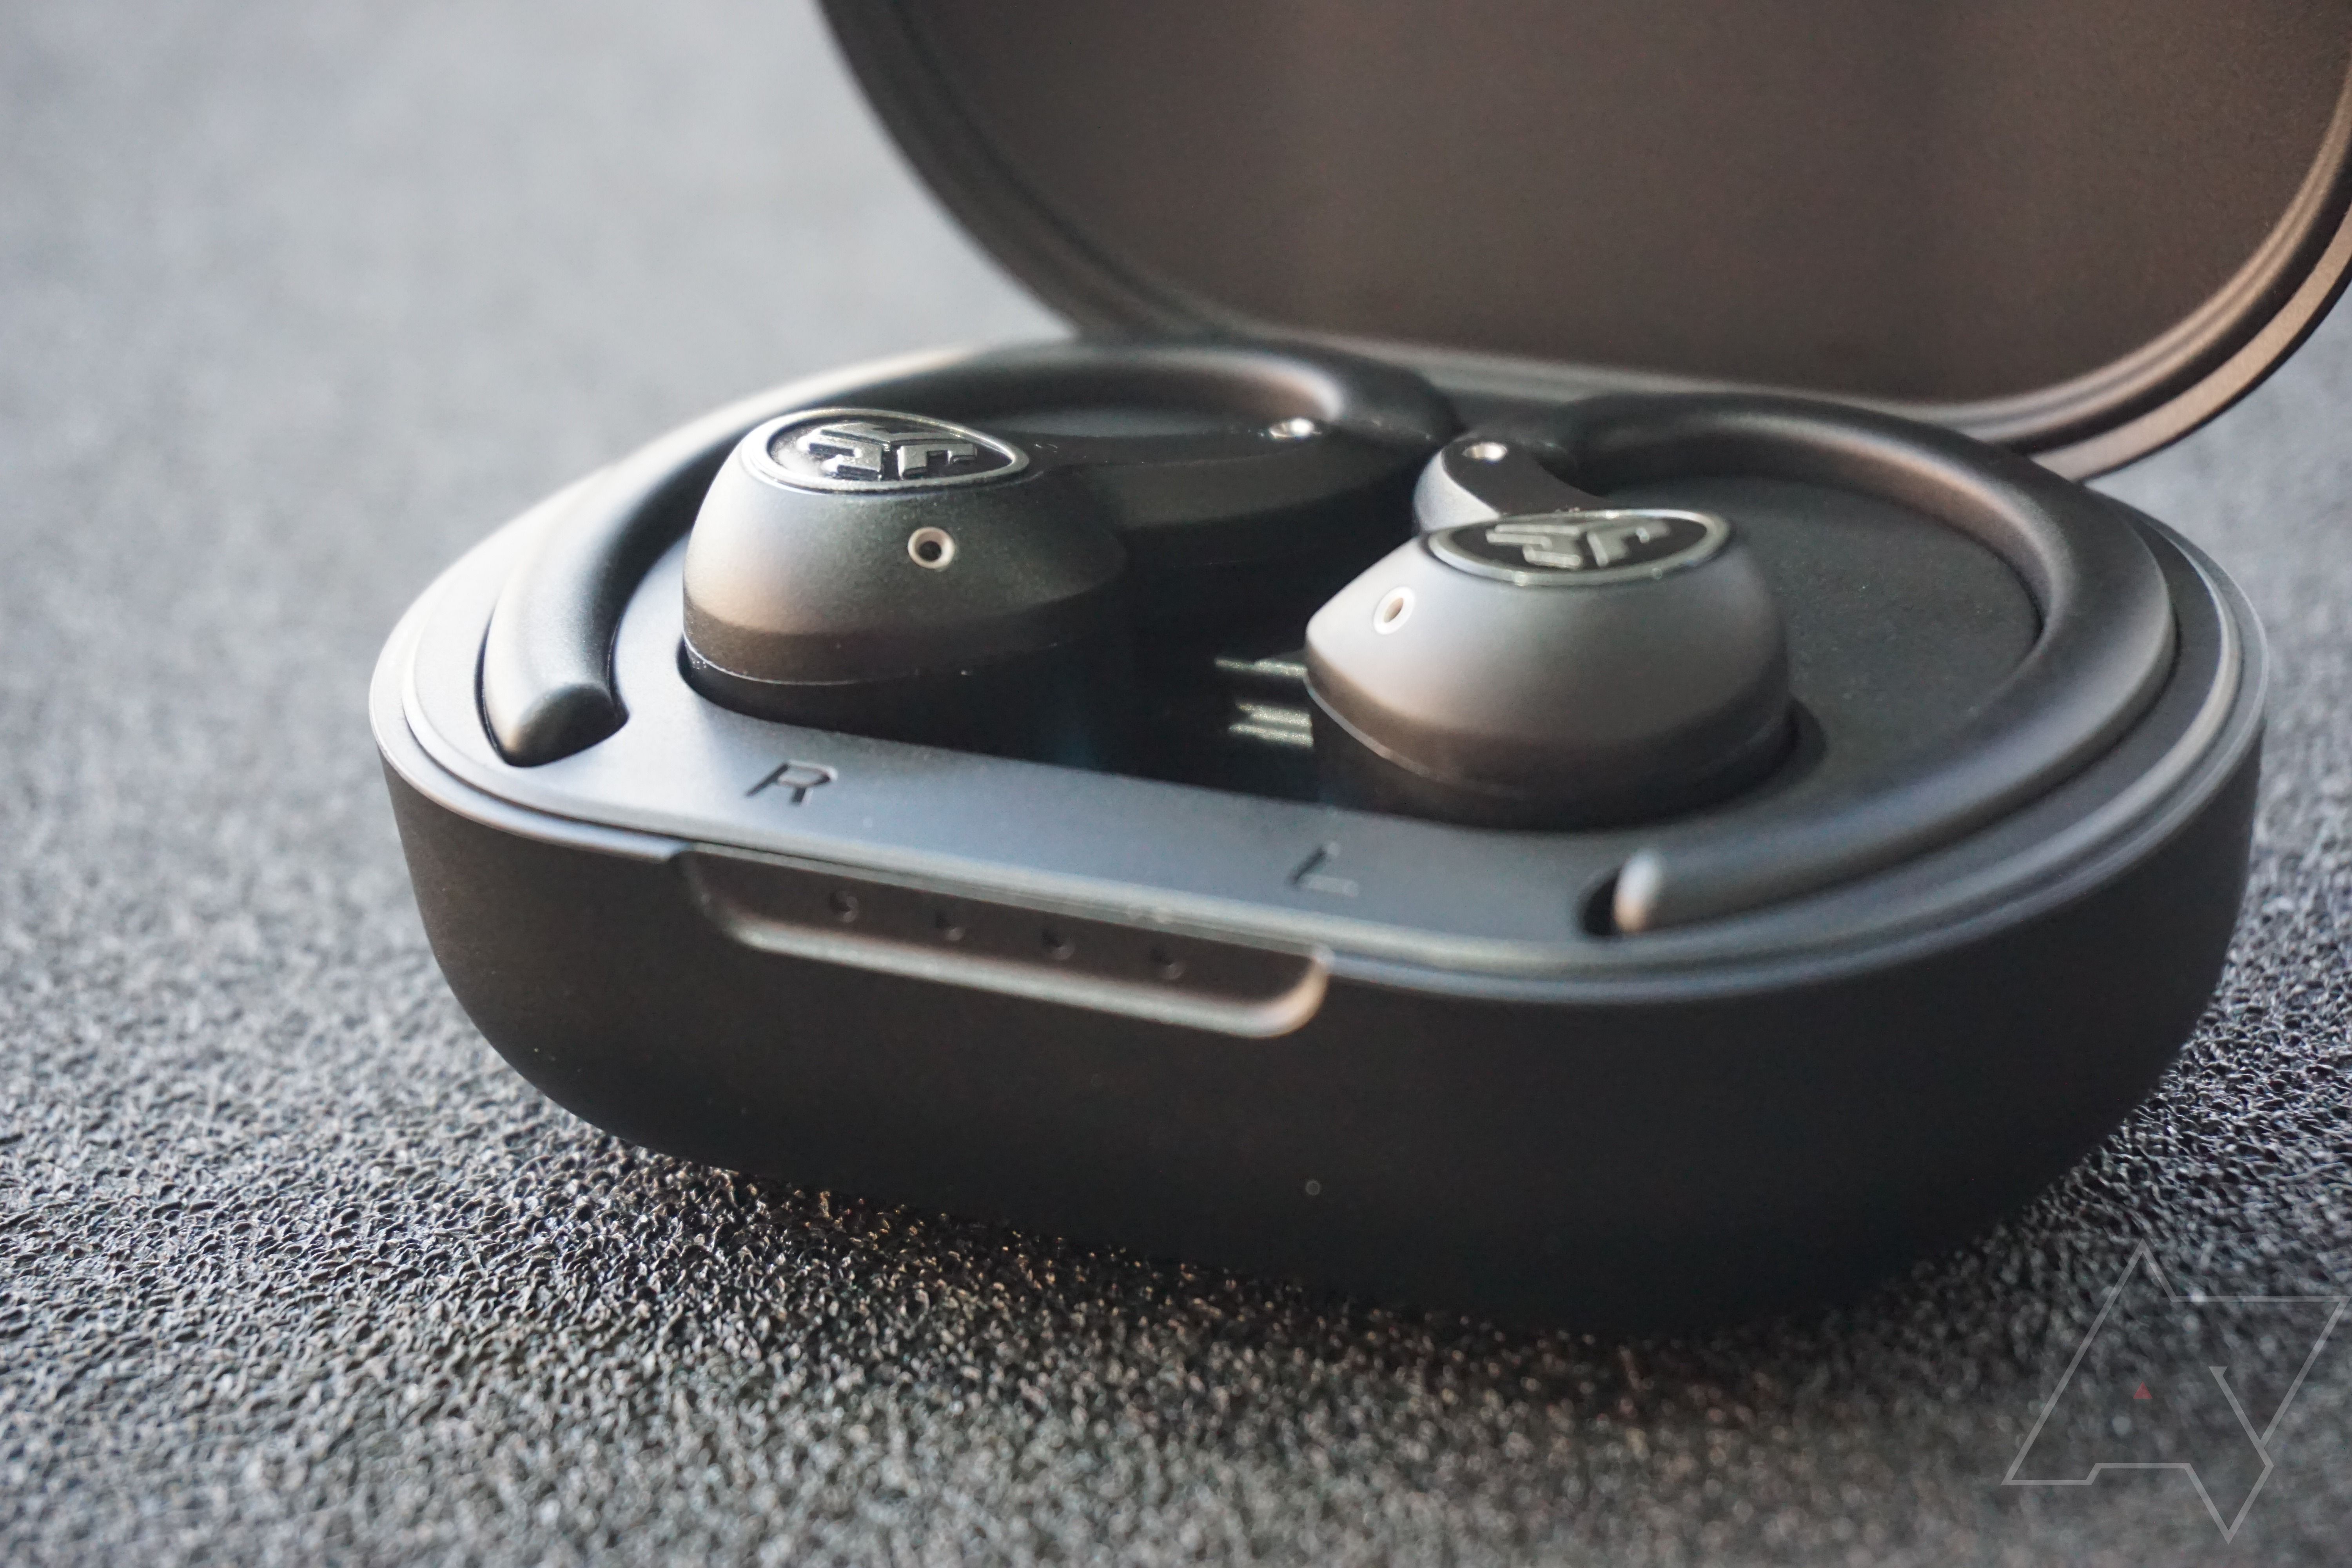 A closeup of the JLab Epic Air Sport earbuds in the case